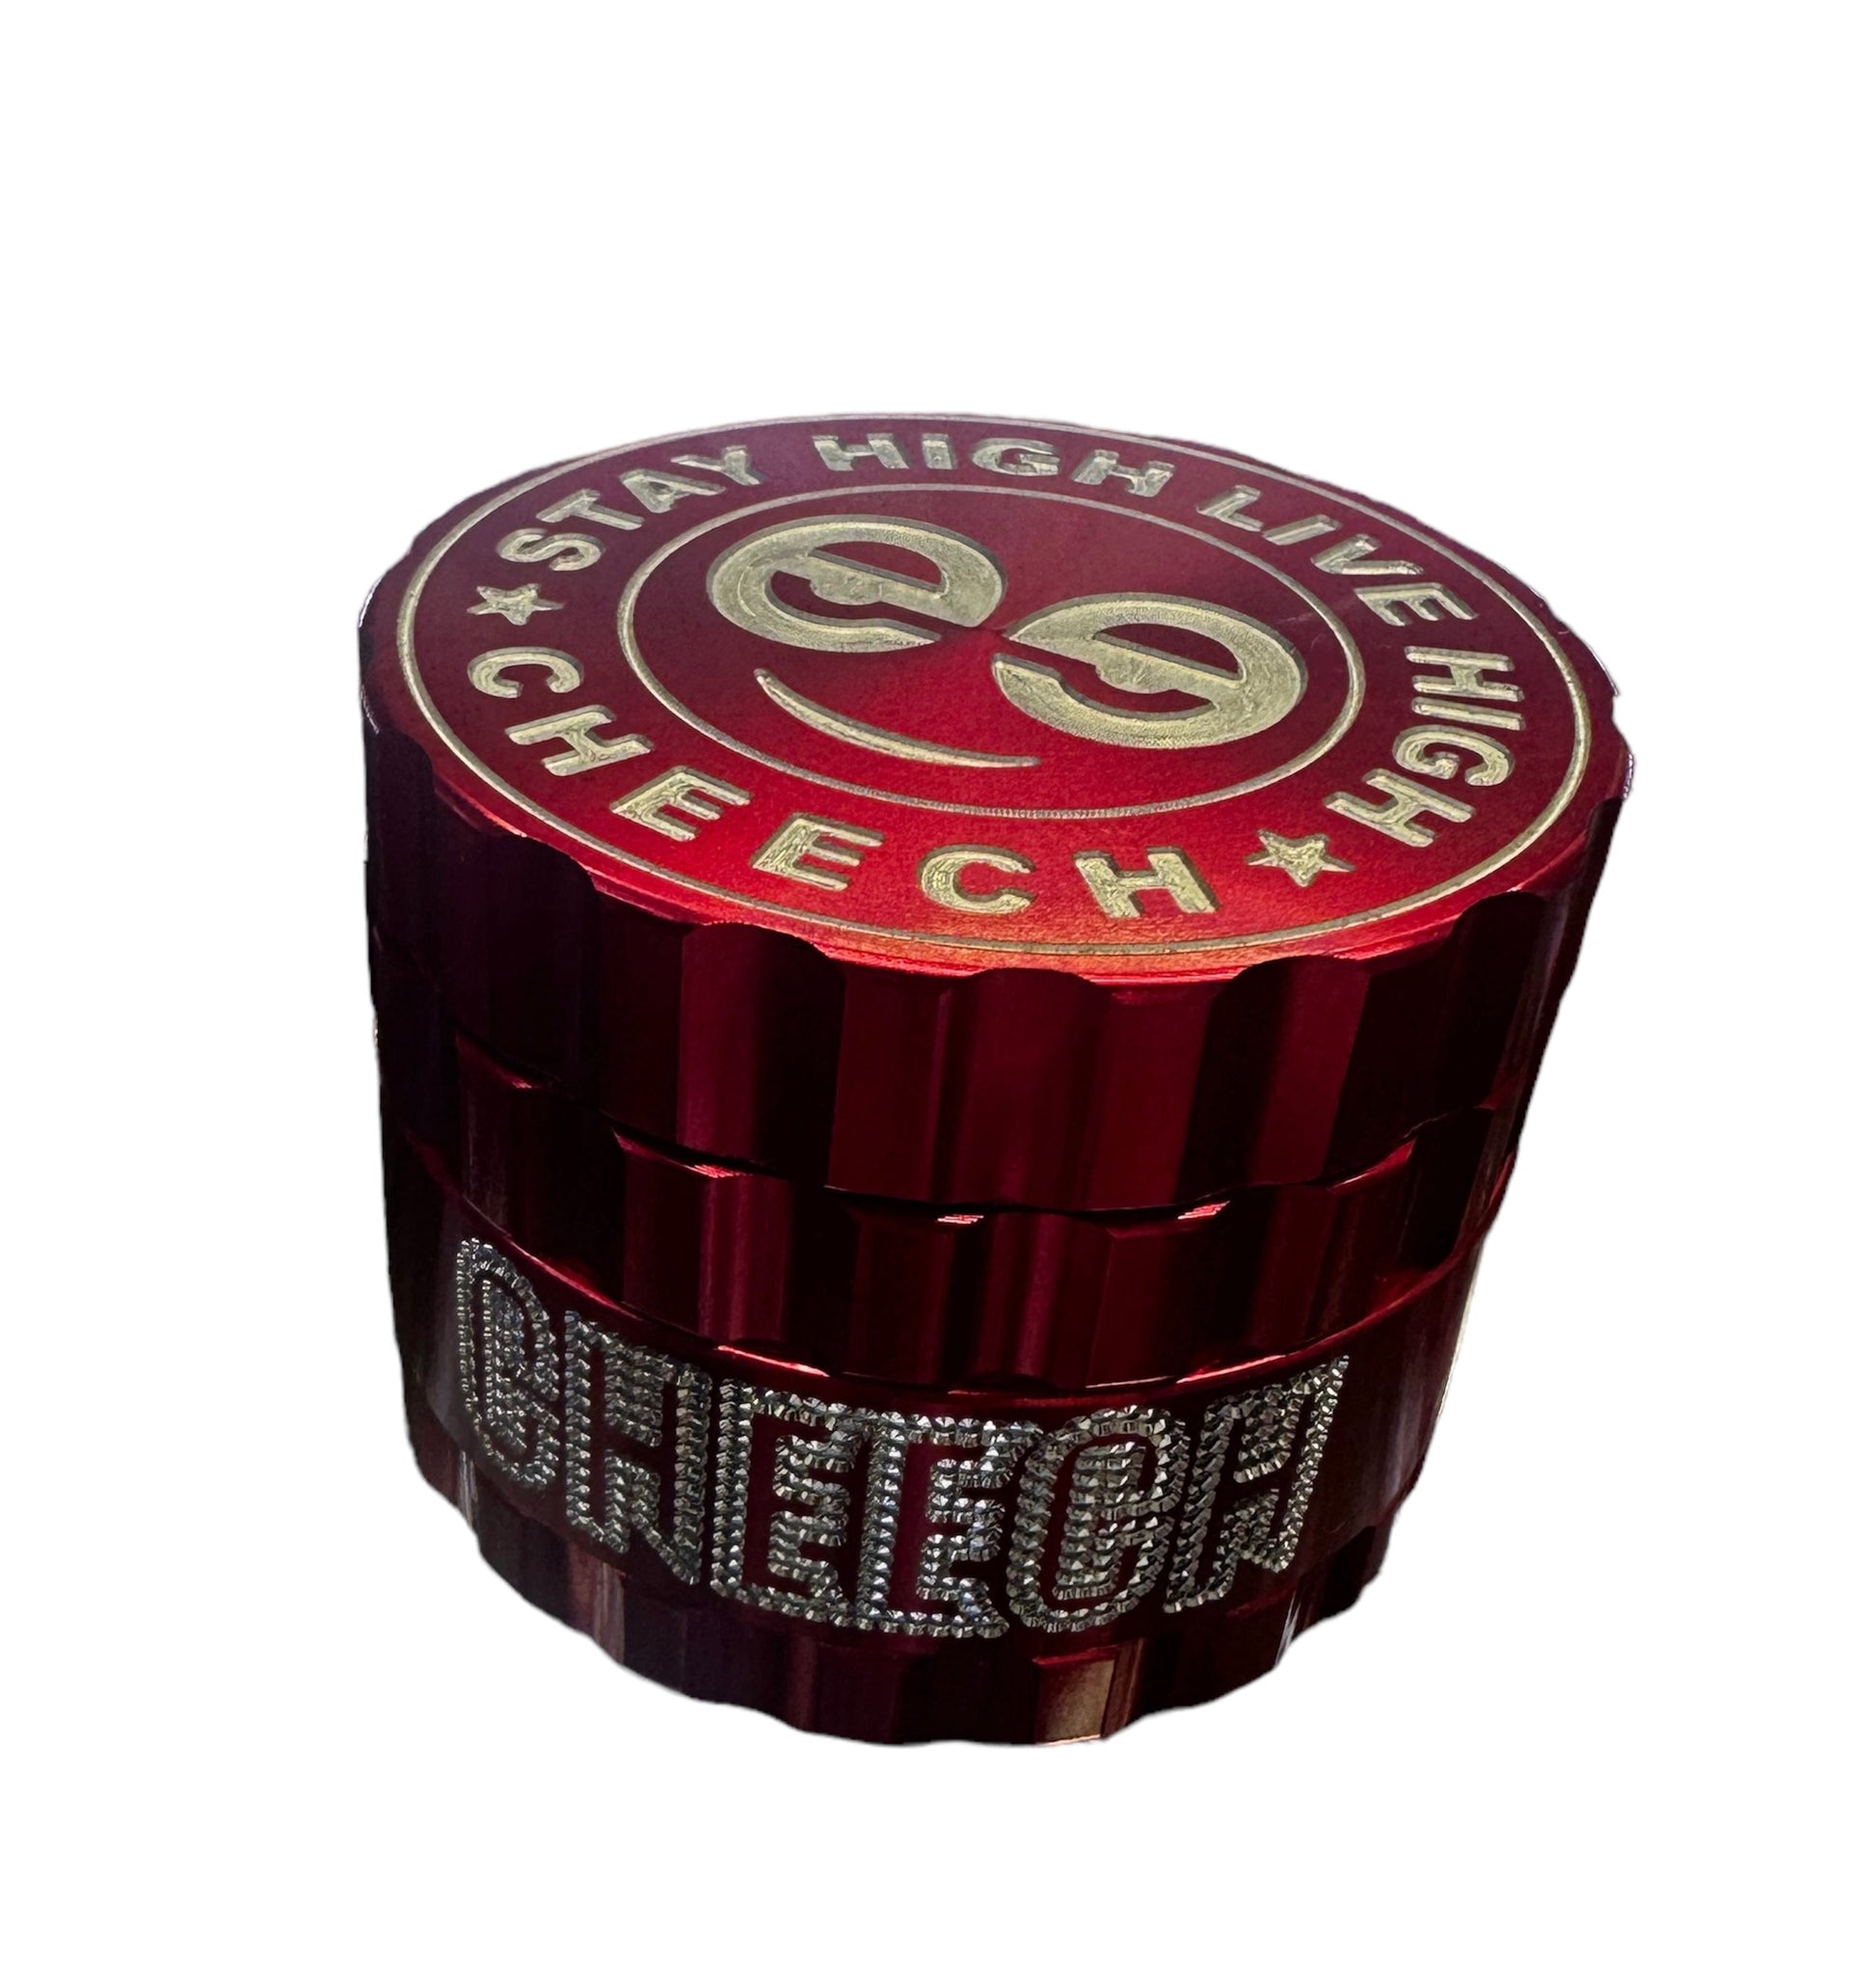 Cheech Retro 4 - Part Grinder red - grinders - the wee smoke shop